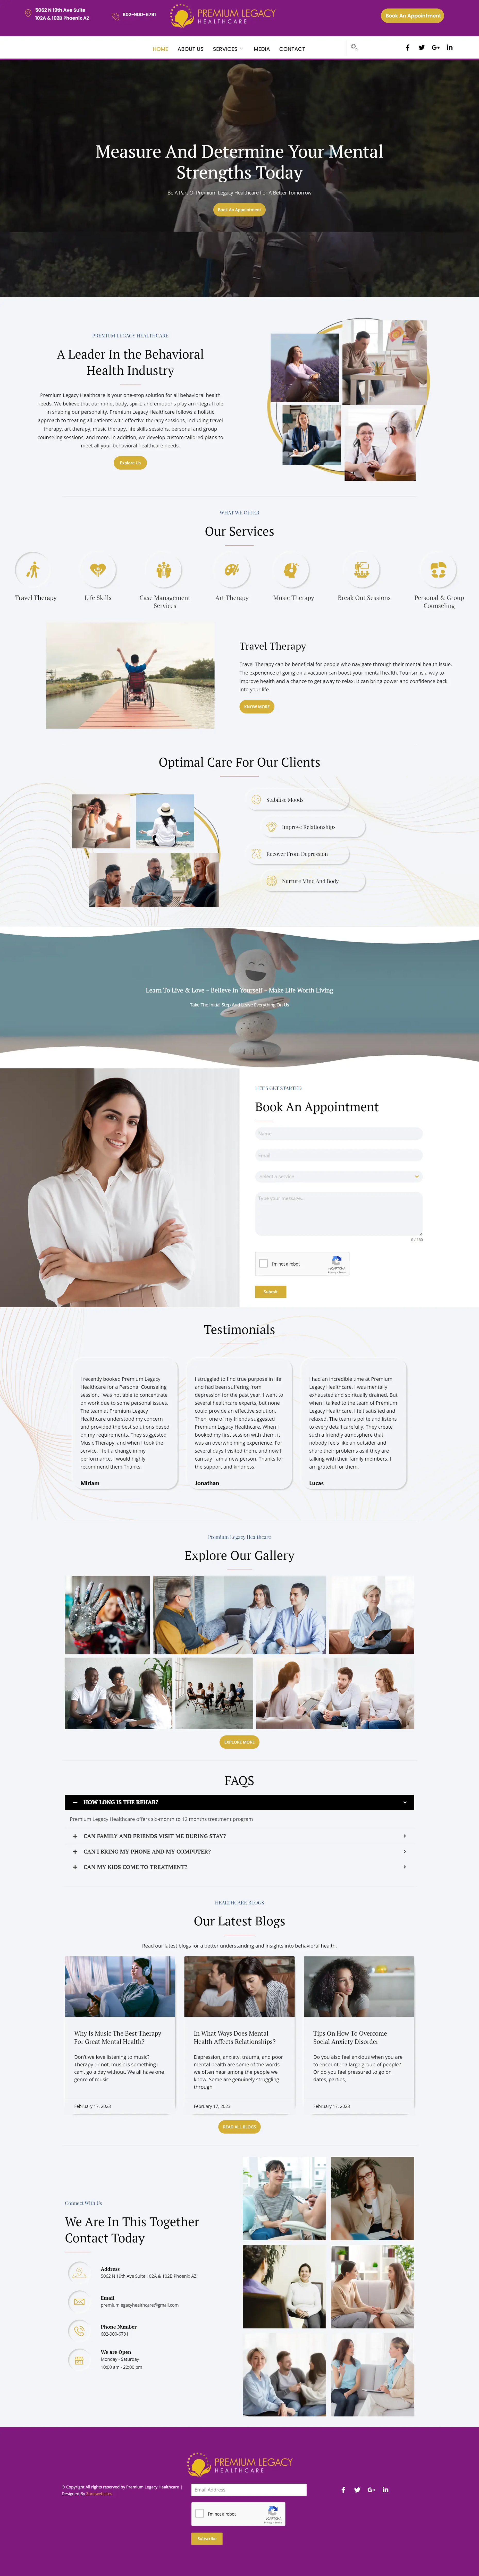 Mental Health Therapy Services Website Template